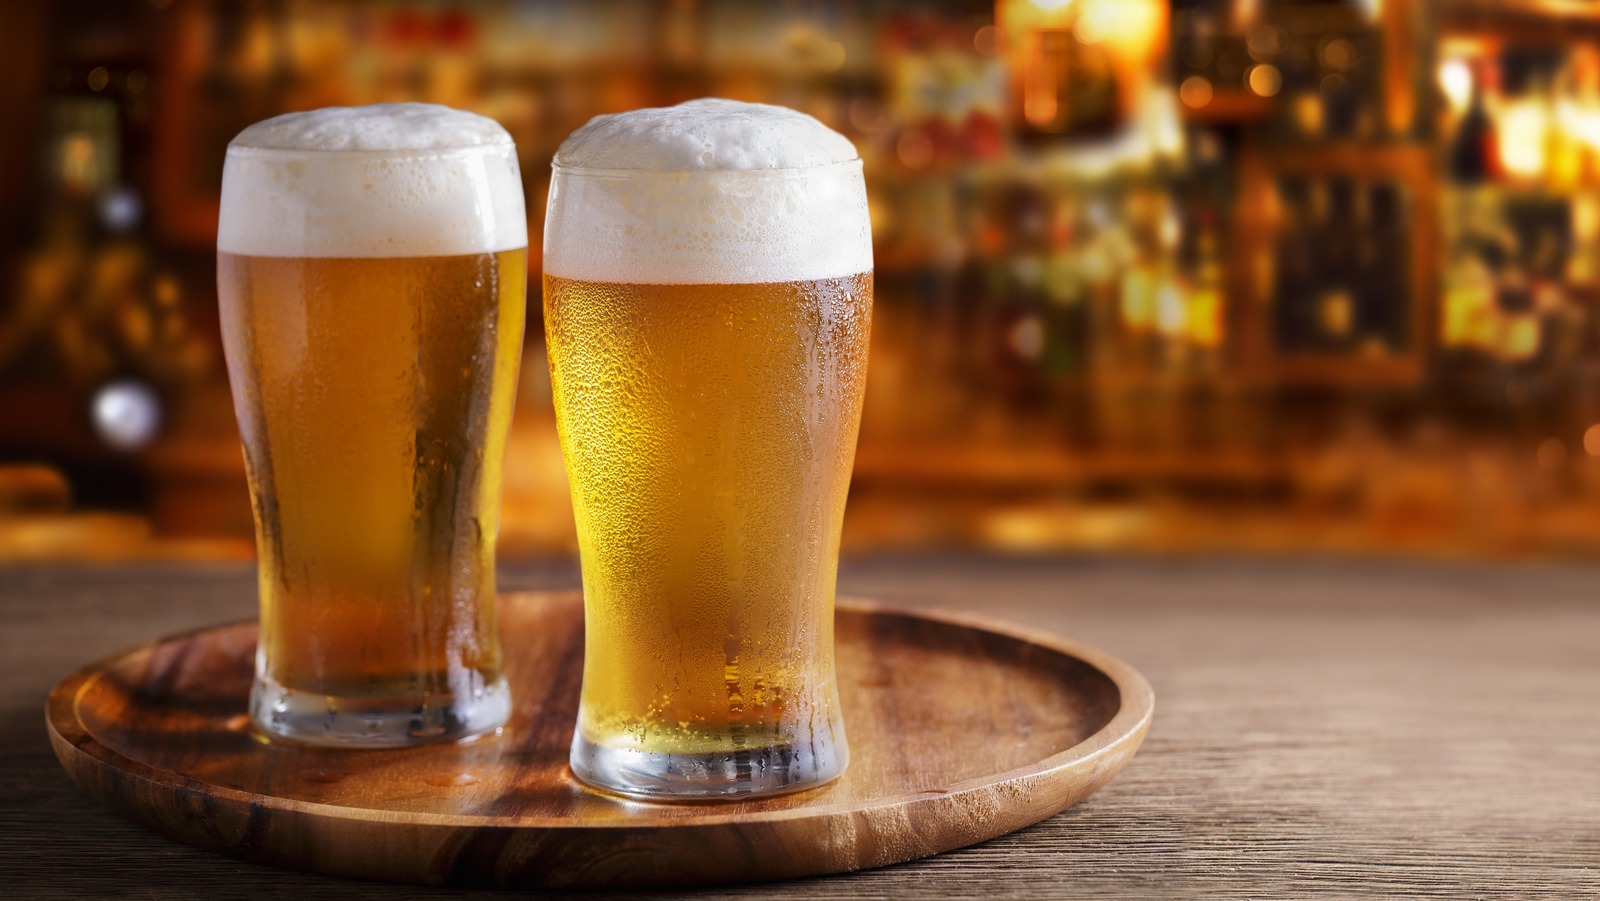 https://www.thedailymeal.com/img/gallery/new-york-city-doesnt-quite-know-what-the-size-of-a-pint-is/l-intro-1679142102.jpg